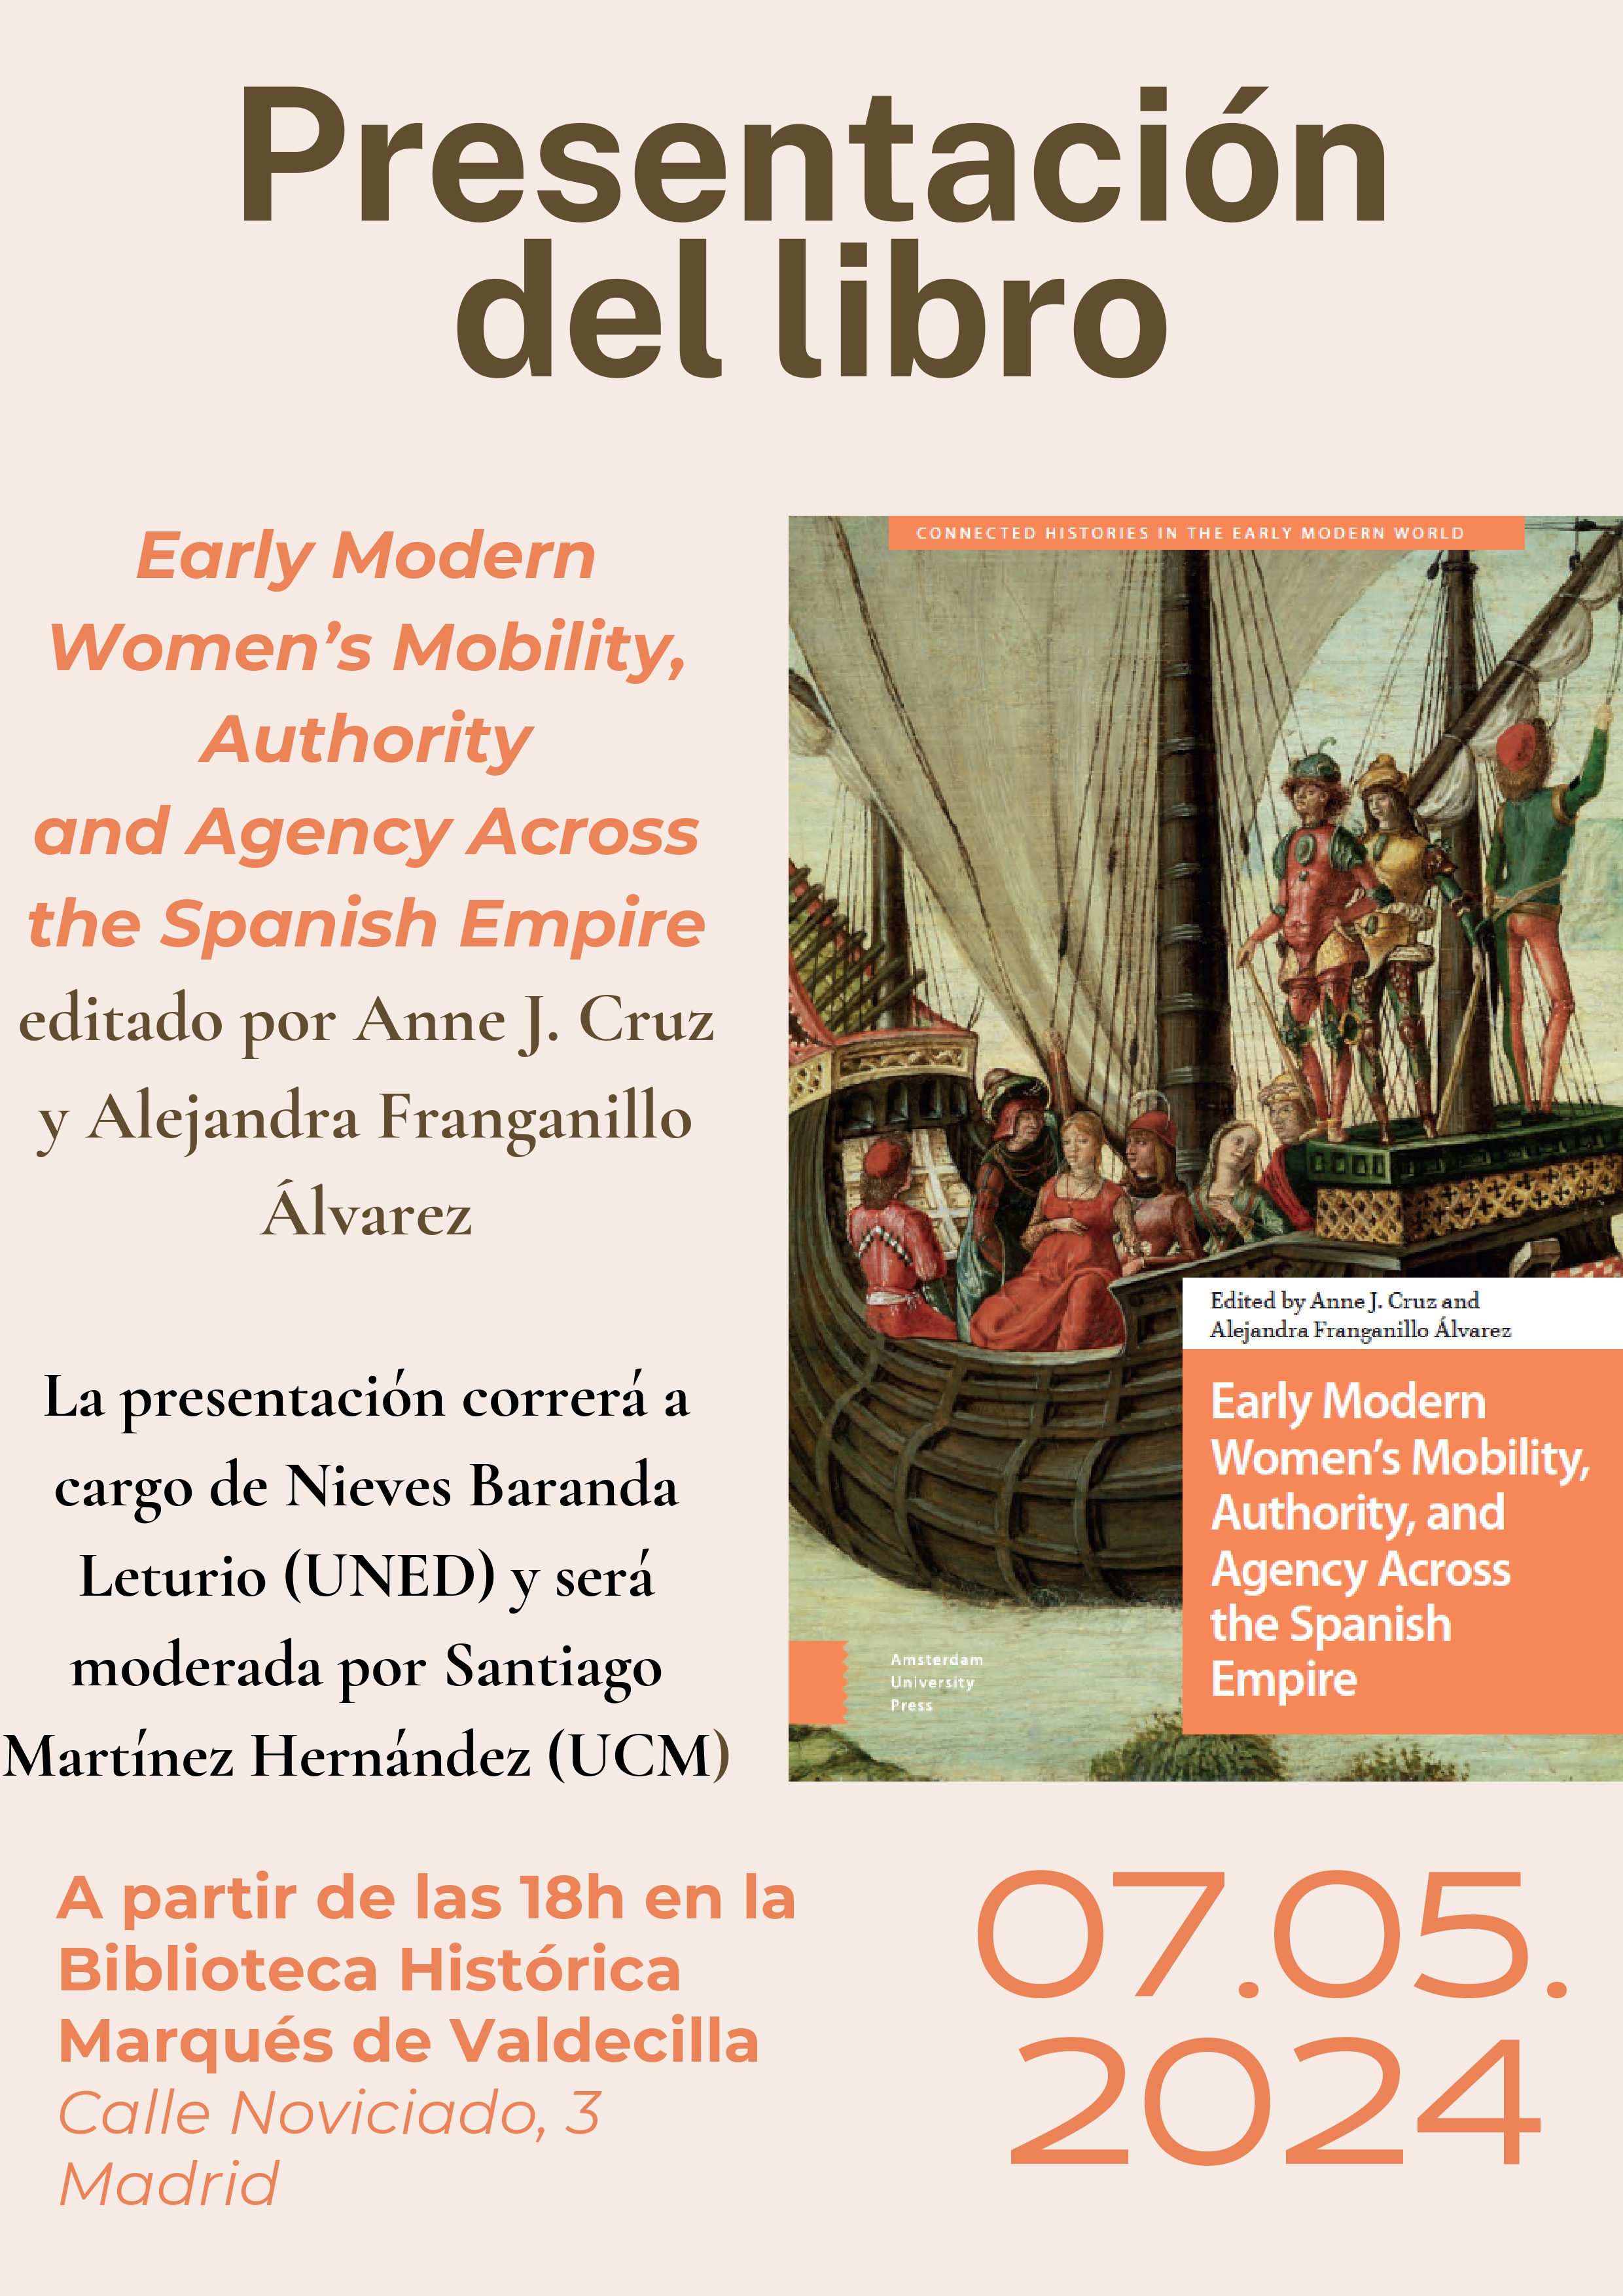 Presentación del libro "Early Modern Women's Mobility, Authority and Agency Across the Spanish Empire" (Amsterdam University Press)